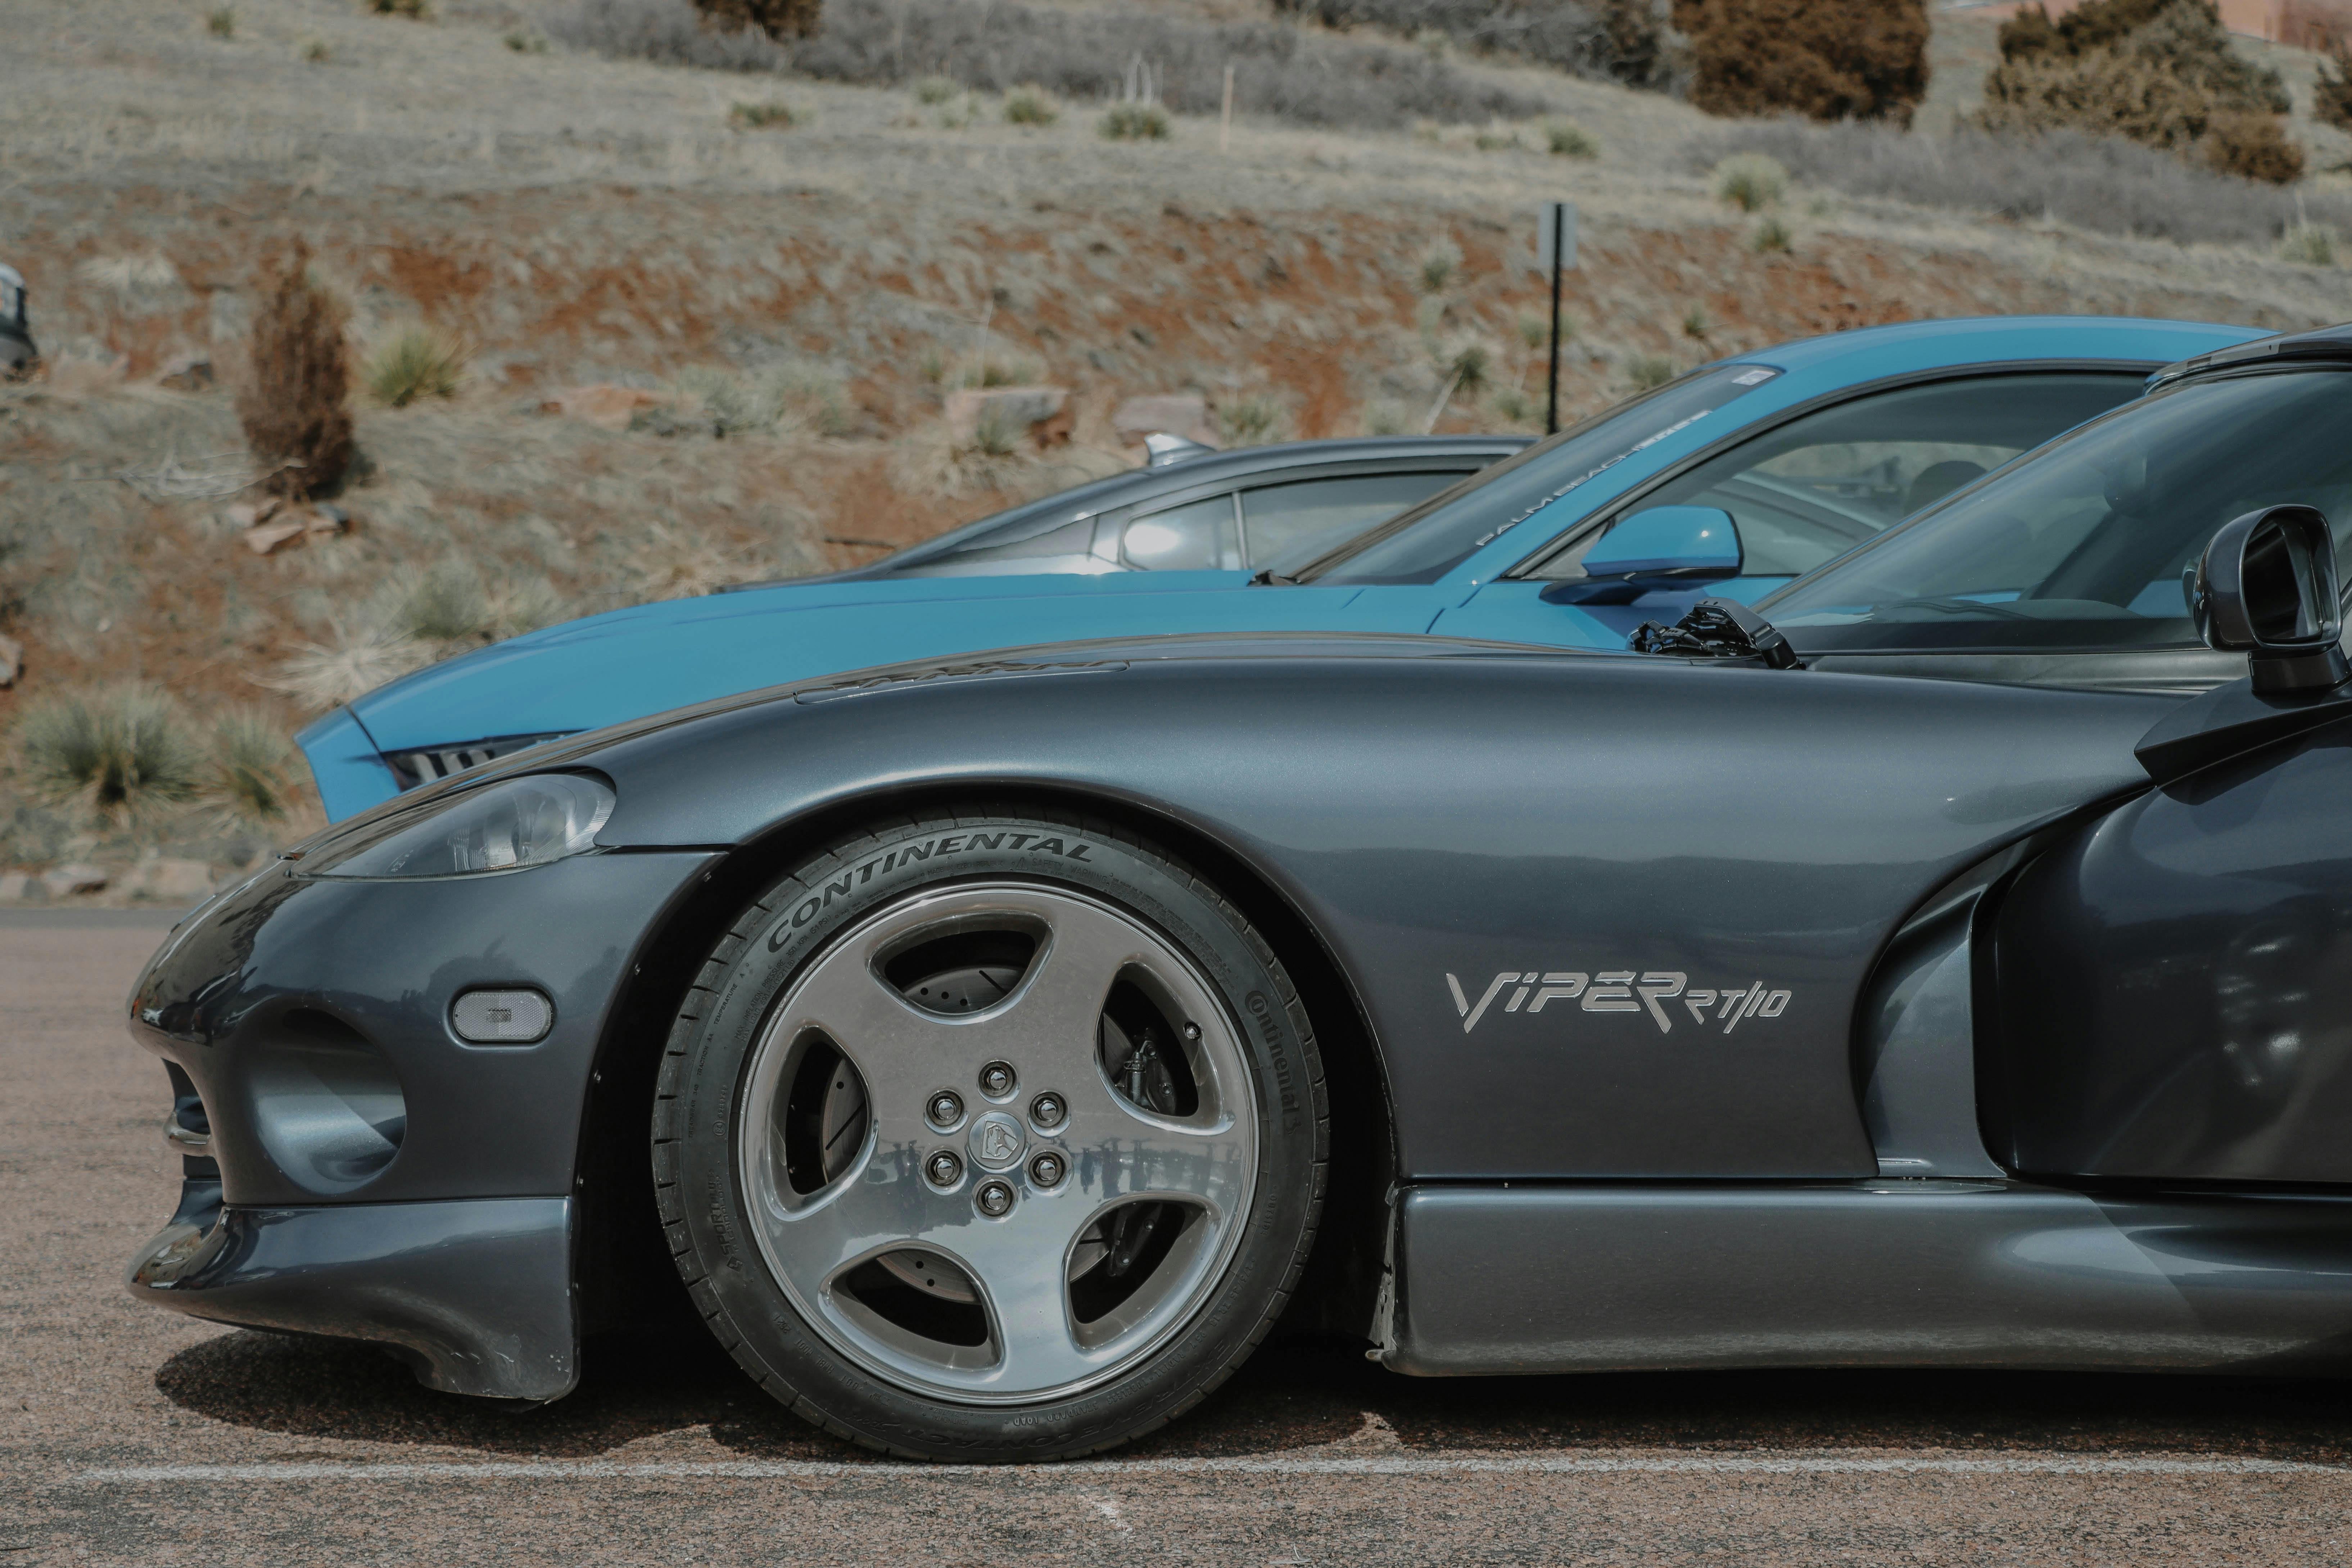 The Dodge Viper is a dream car of many. An iconic sports car known worldwide.